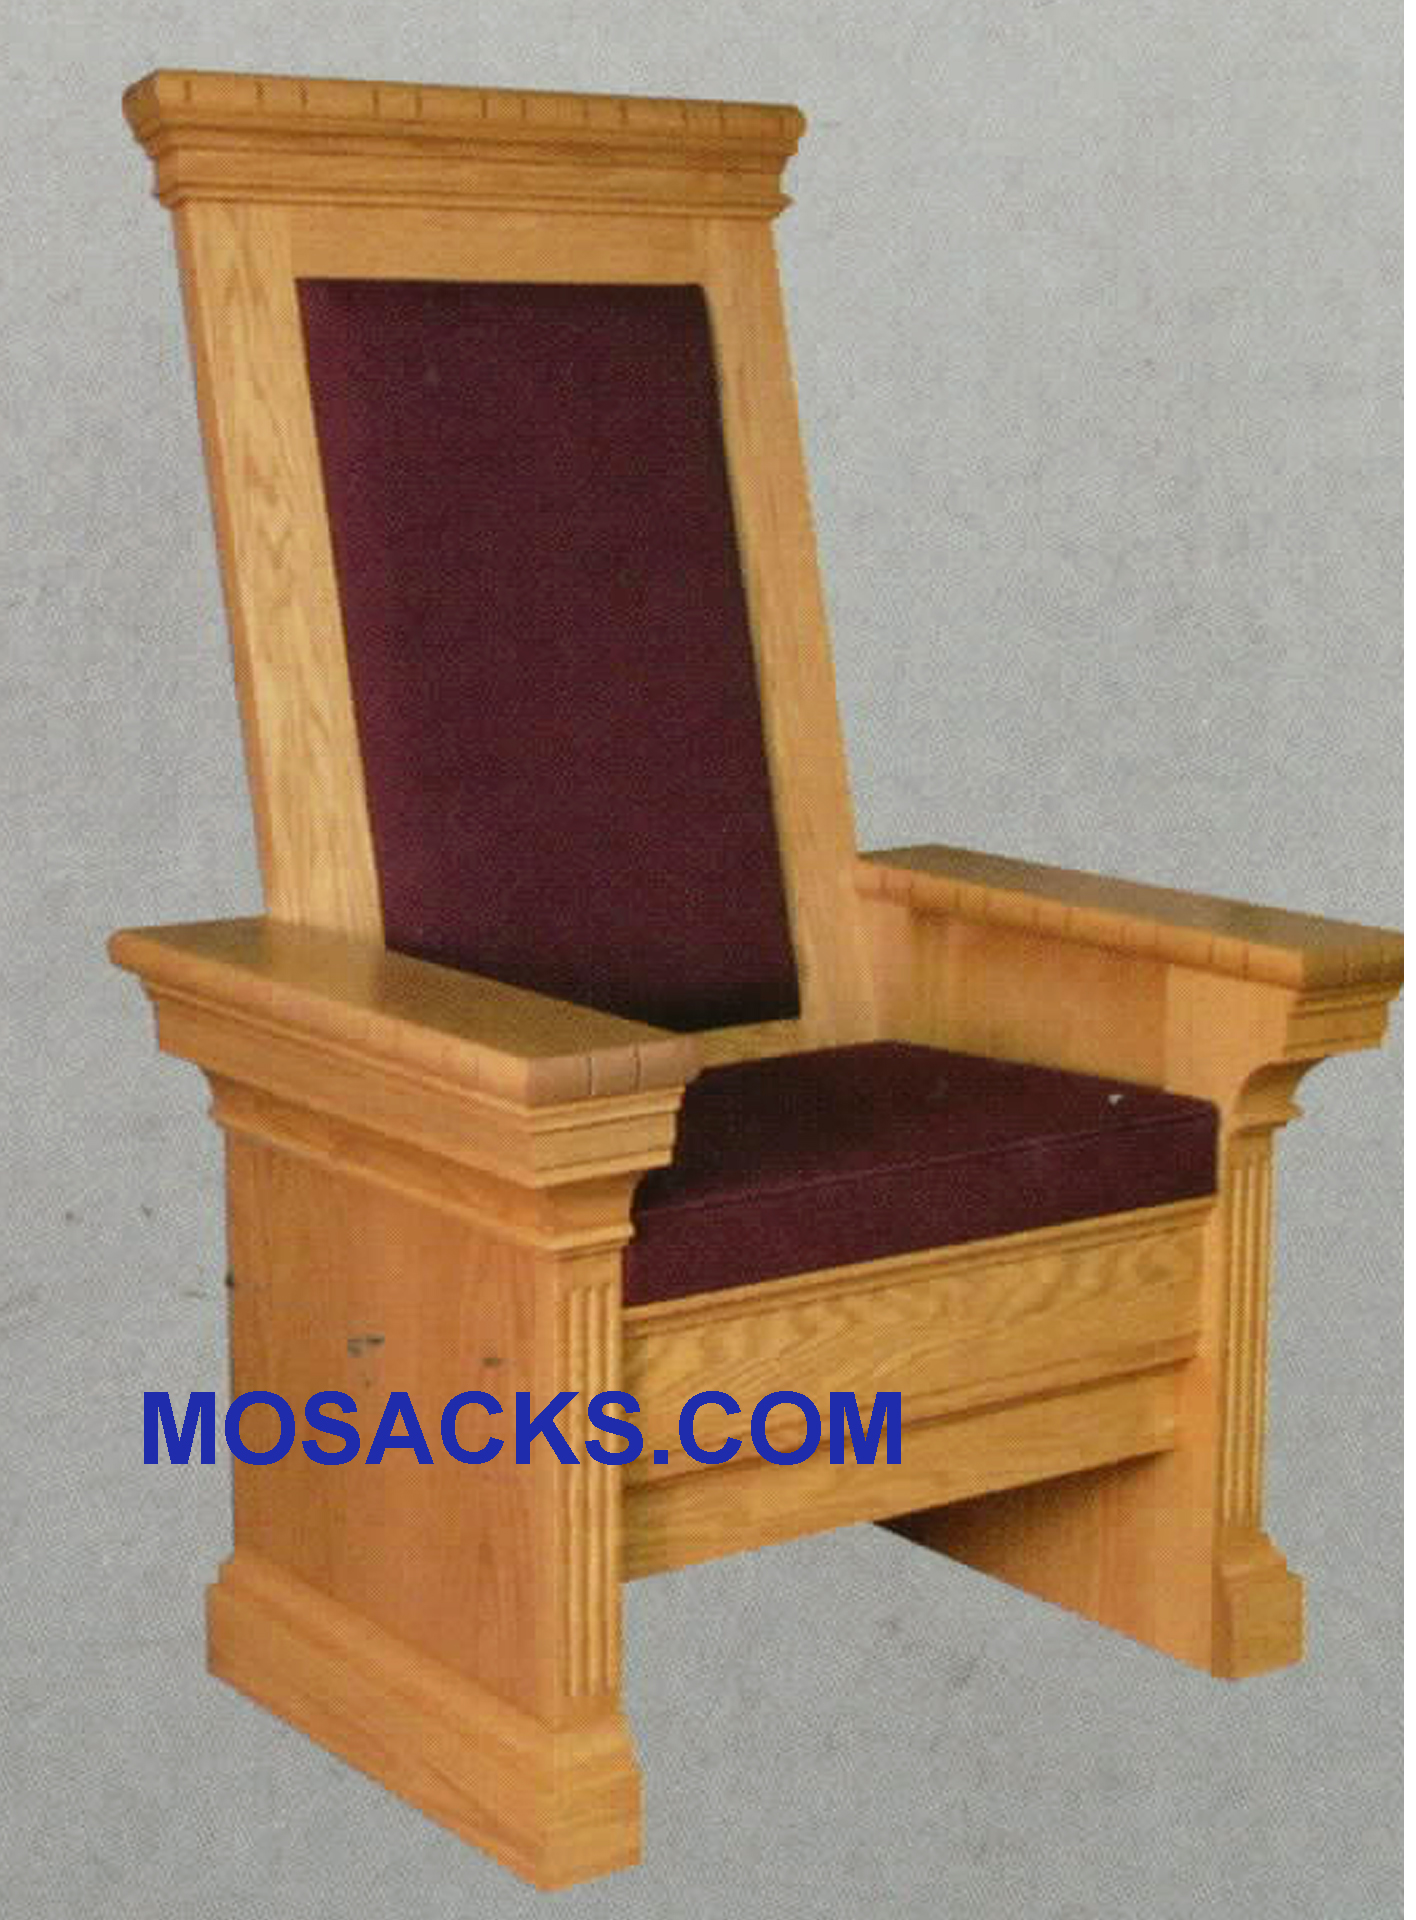 Celebrant Chair w/ upholstered seat and back 34" w x 30" d 52" h 653